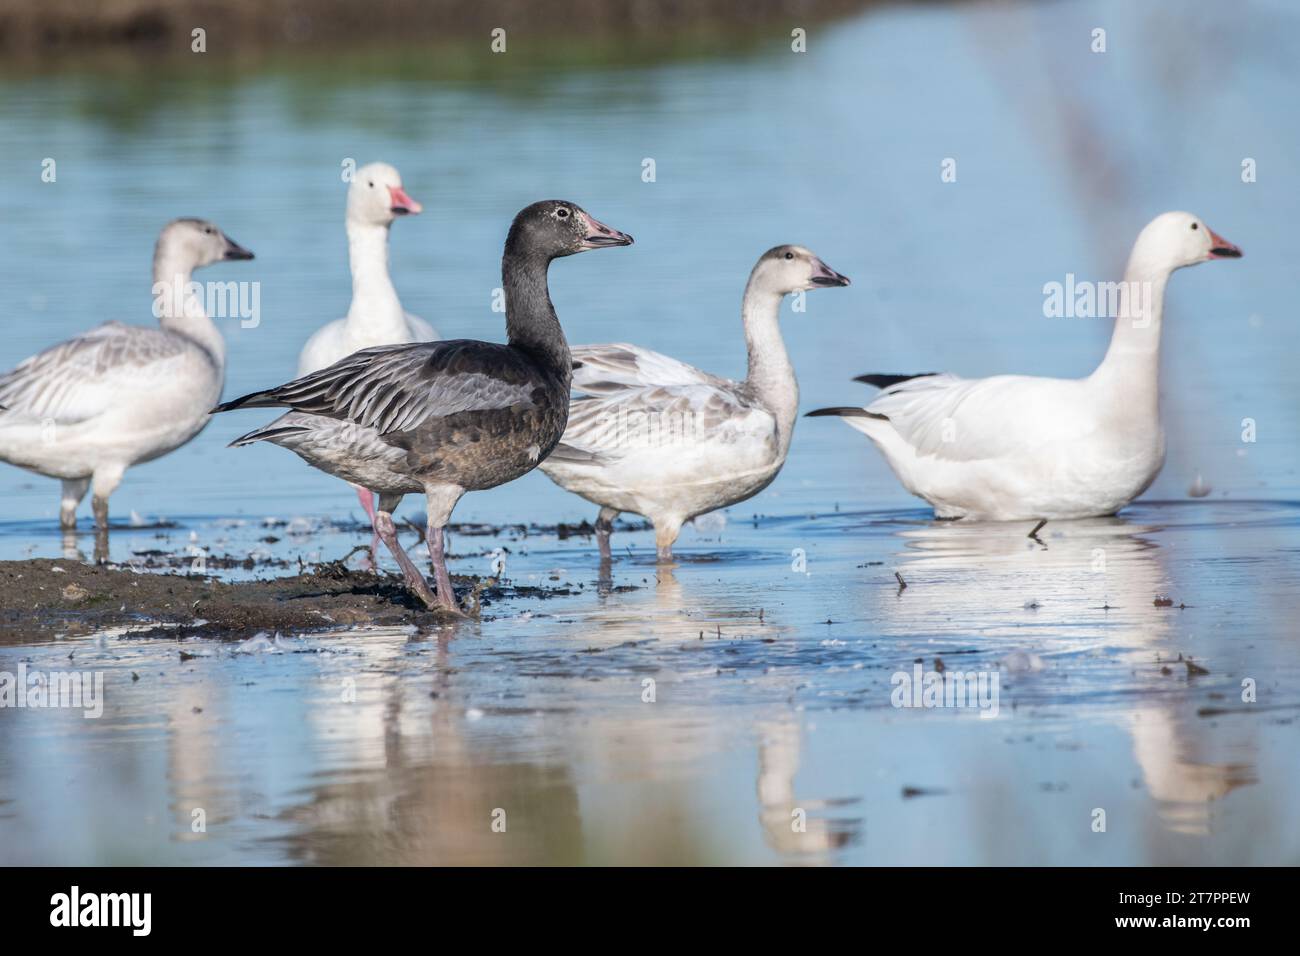 A blue morph snow goose, Anser caerulescens, surrounding by normal looking geese in Sacramento wildlfie refuge in the Central valley of California. Stock Photo